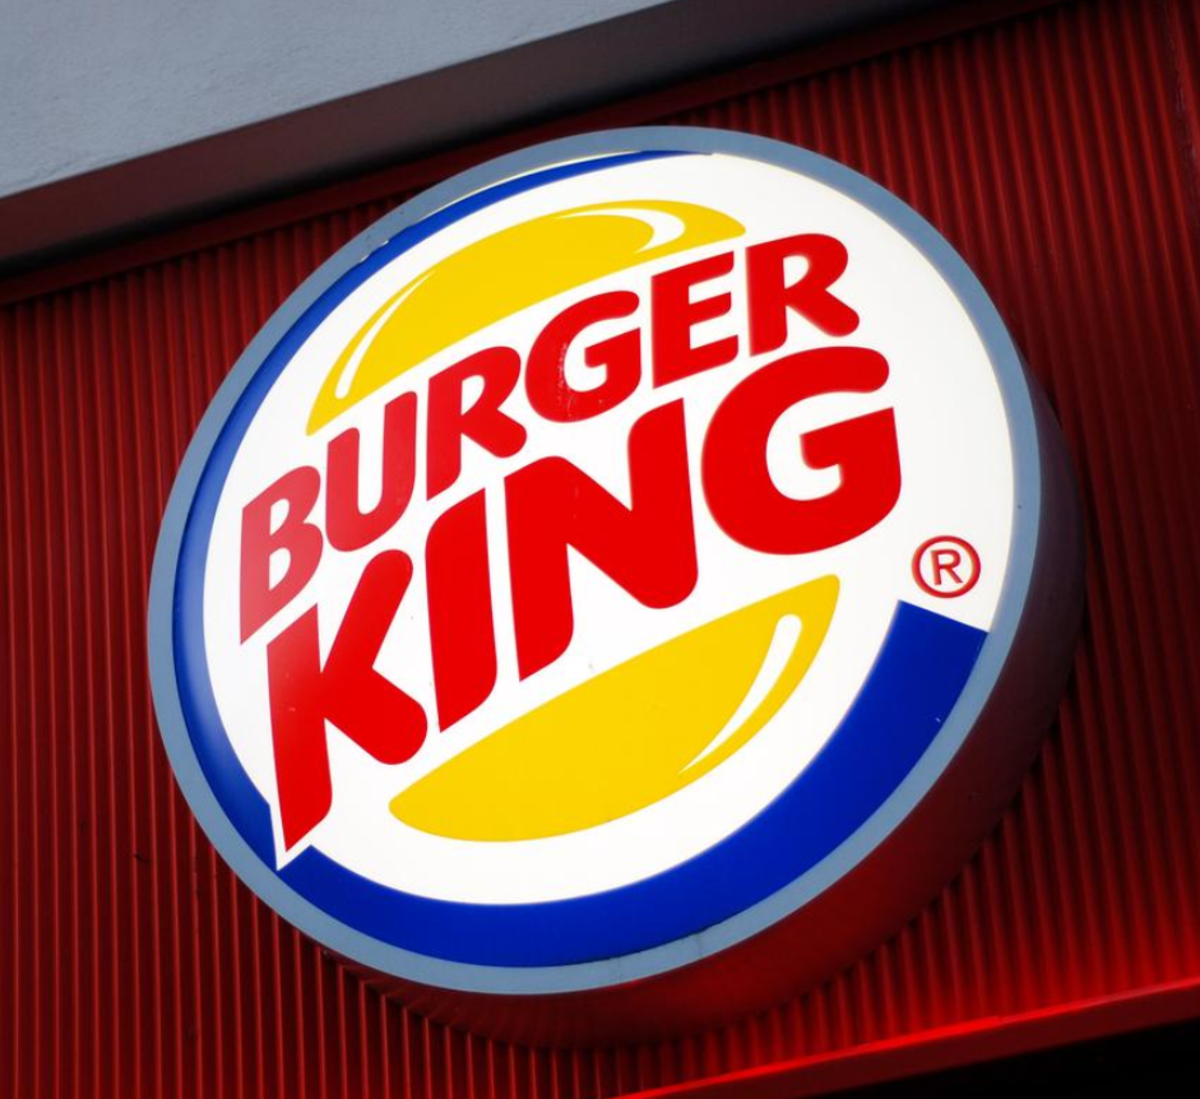 Can Burger King Restore the Brand?